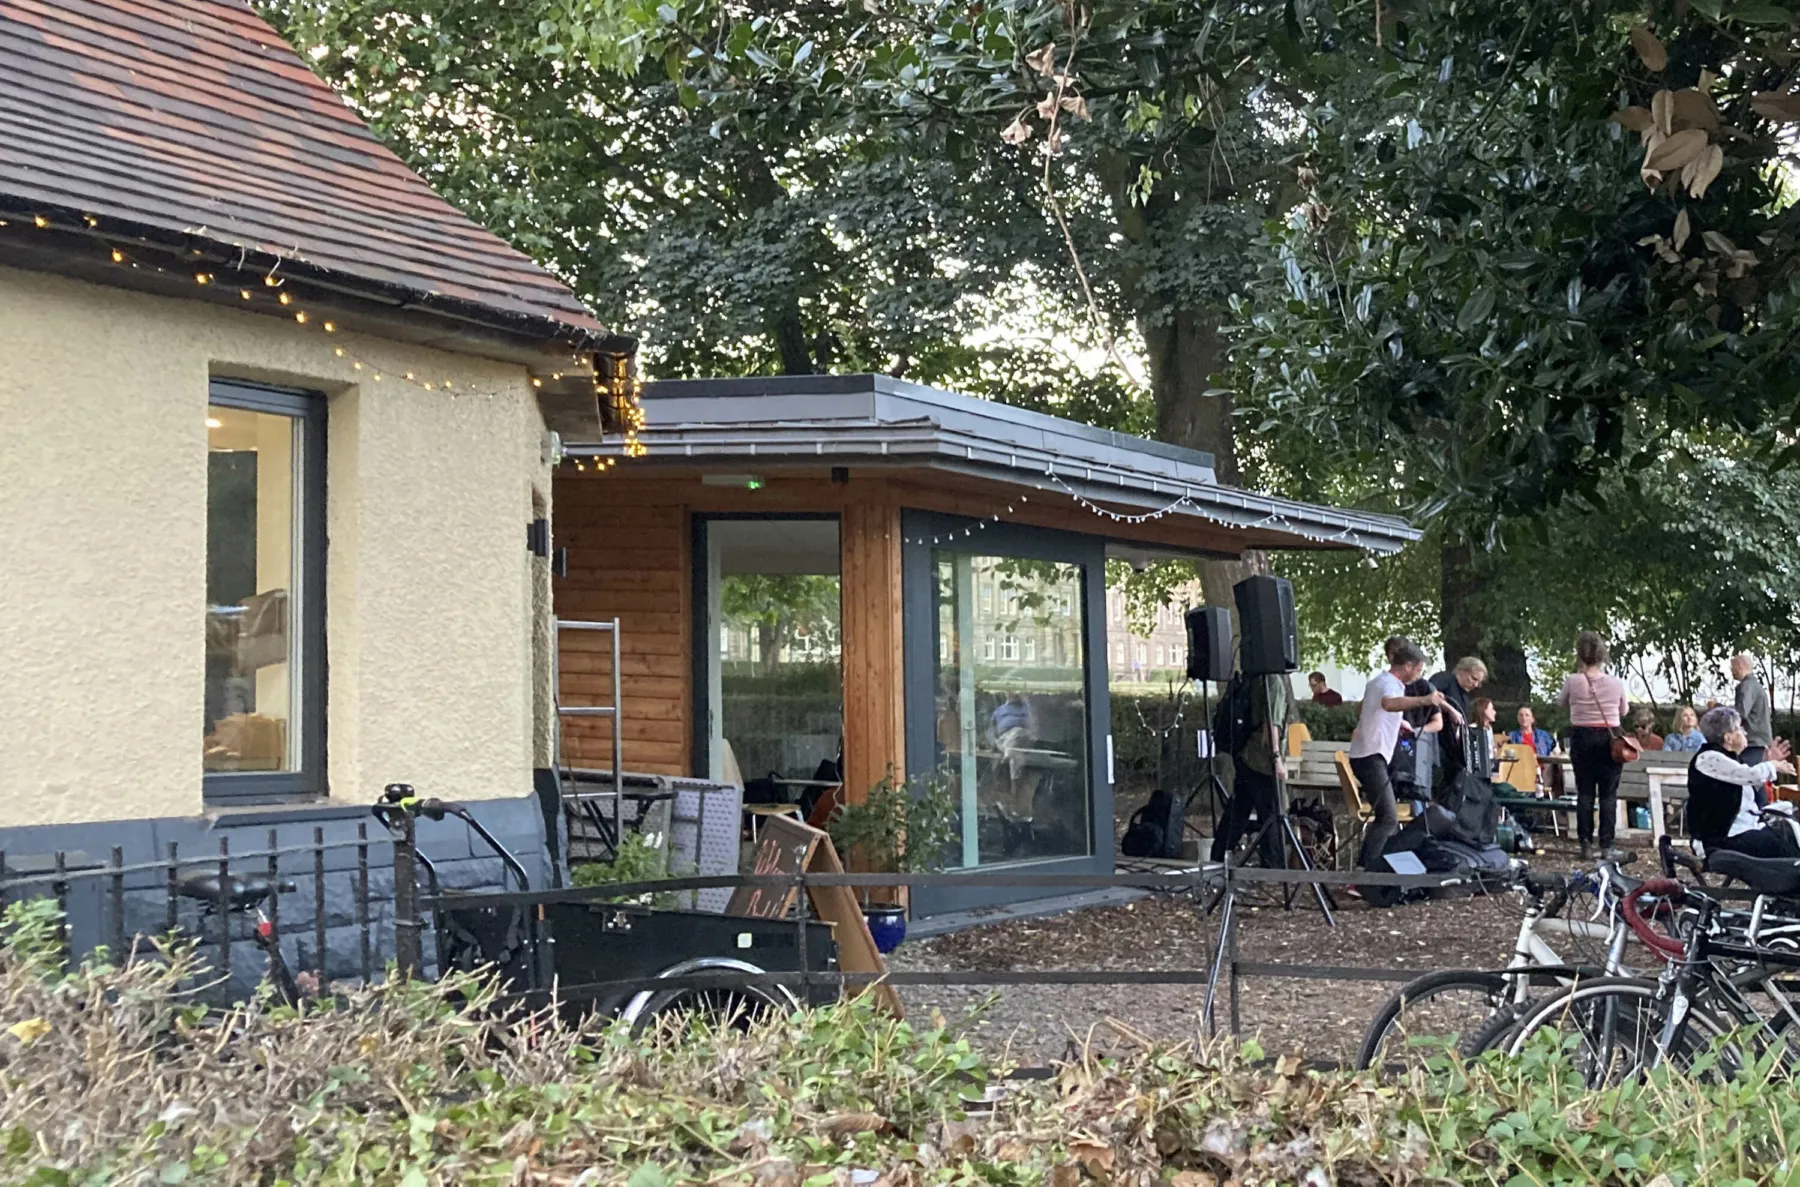 View of the new extension at Leith Community Croft, an urban growing project with cafe. The new extension is glazed and has a flat sedum roof. Visitors gather under the trees.